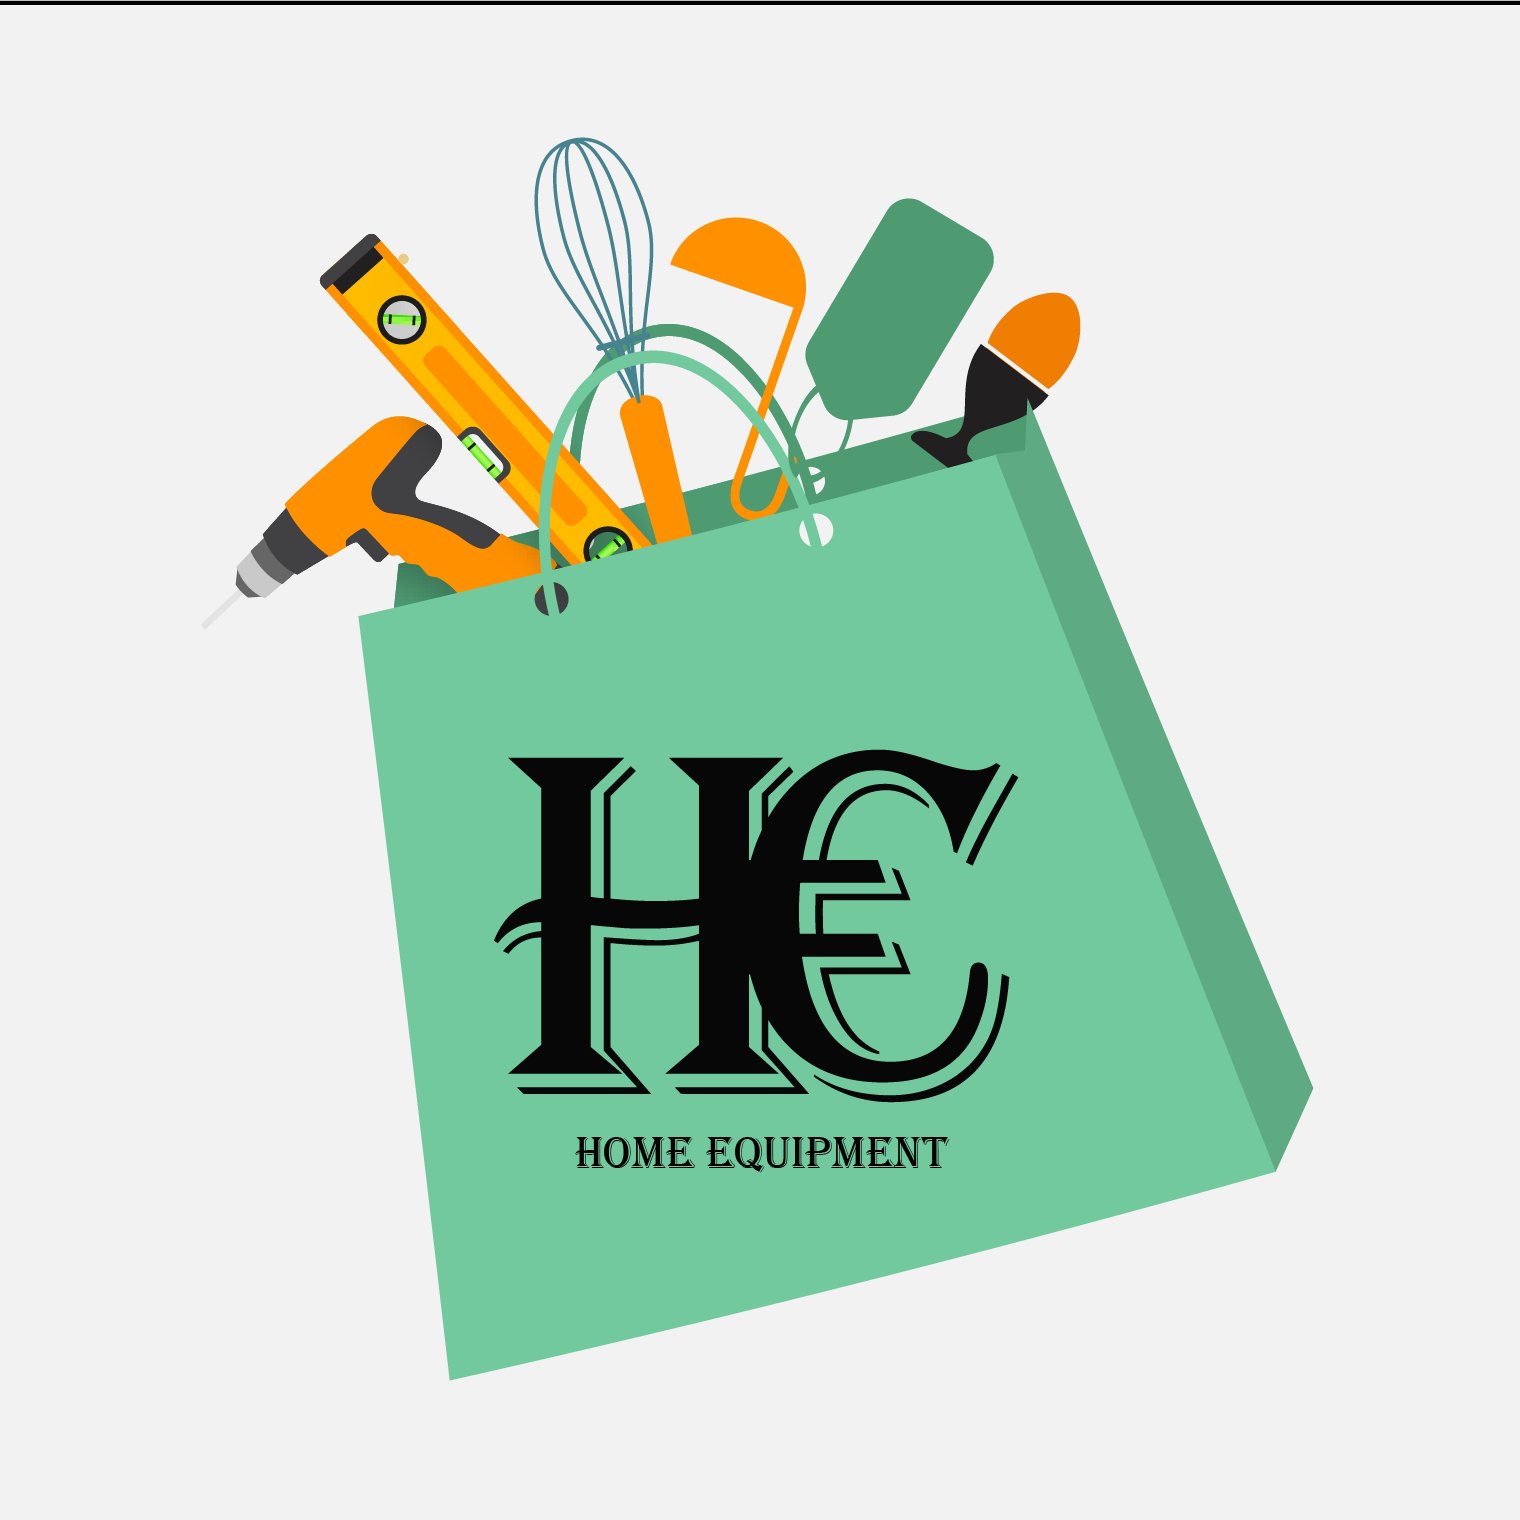 Find the best #home tools and gardening #equipment at #Homeequi. We make every #house work easy with an extensive selection of useful #machinery and #tools.